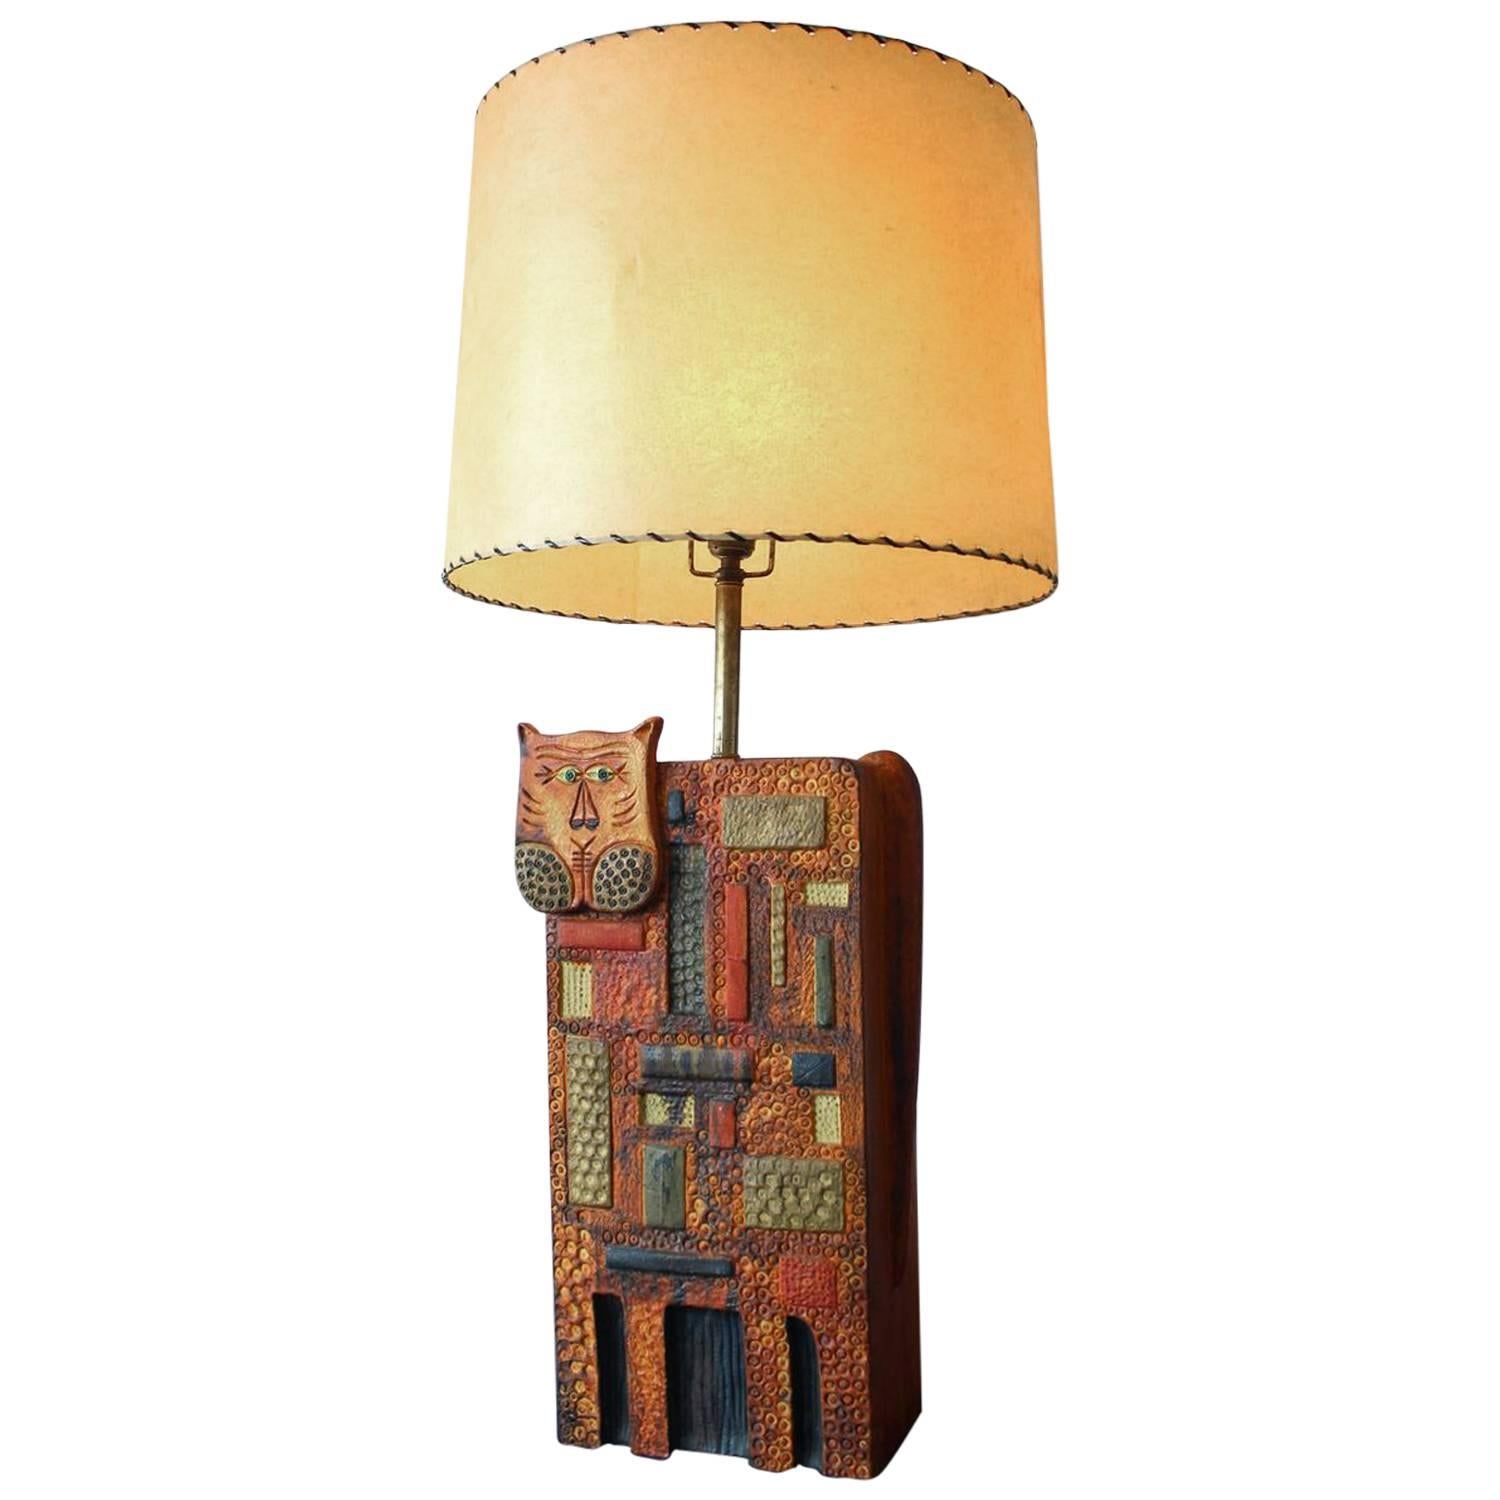 Large Italian Ceramic Lamp Form with Applied Cat Head by Fantoni, 1960 For Sale